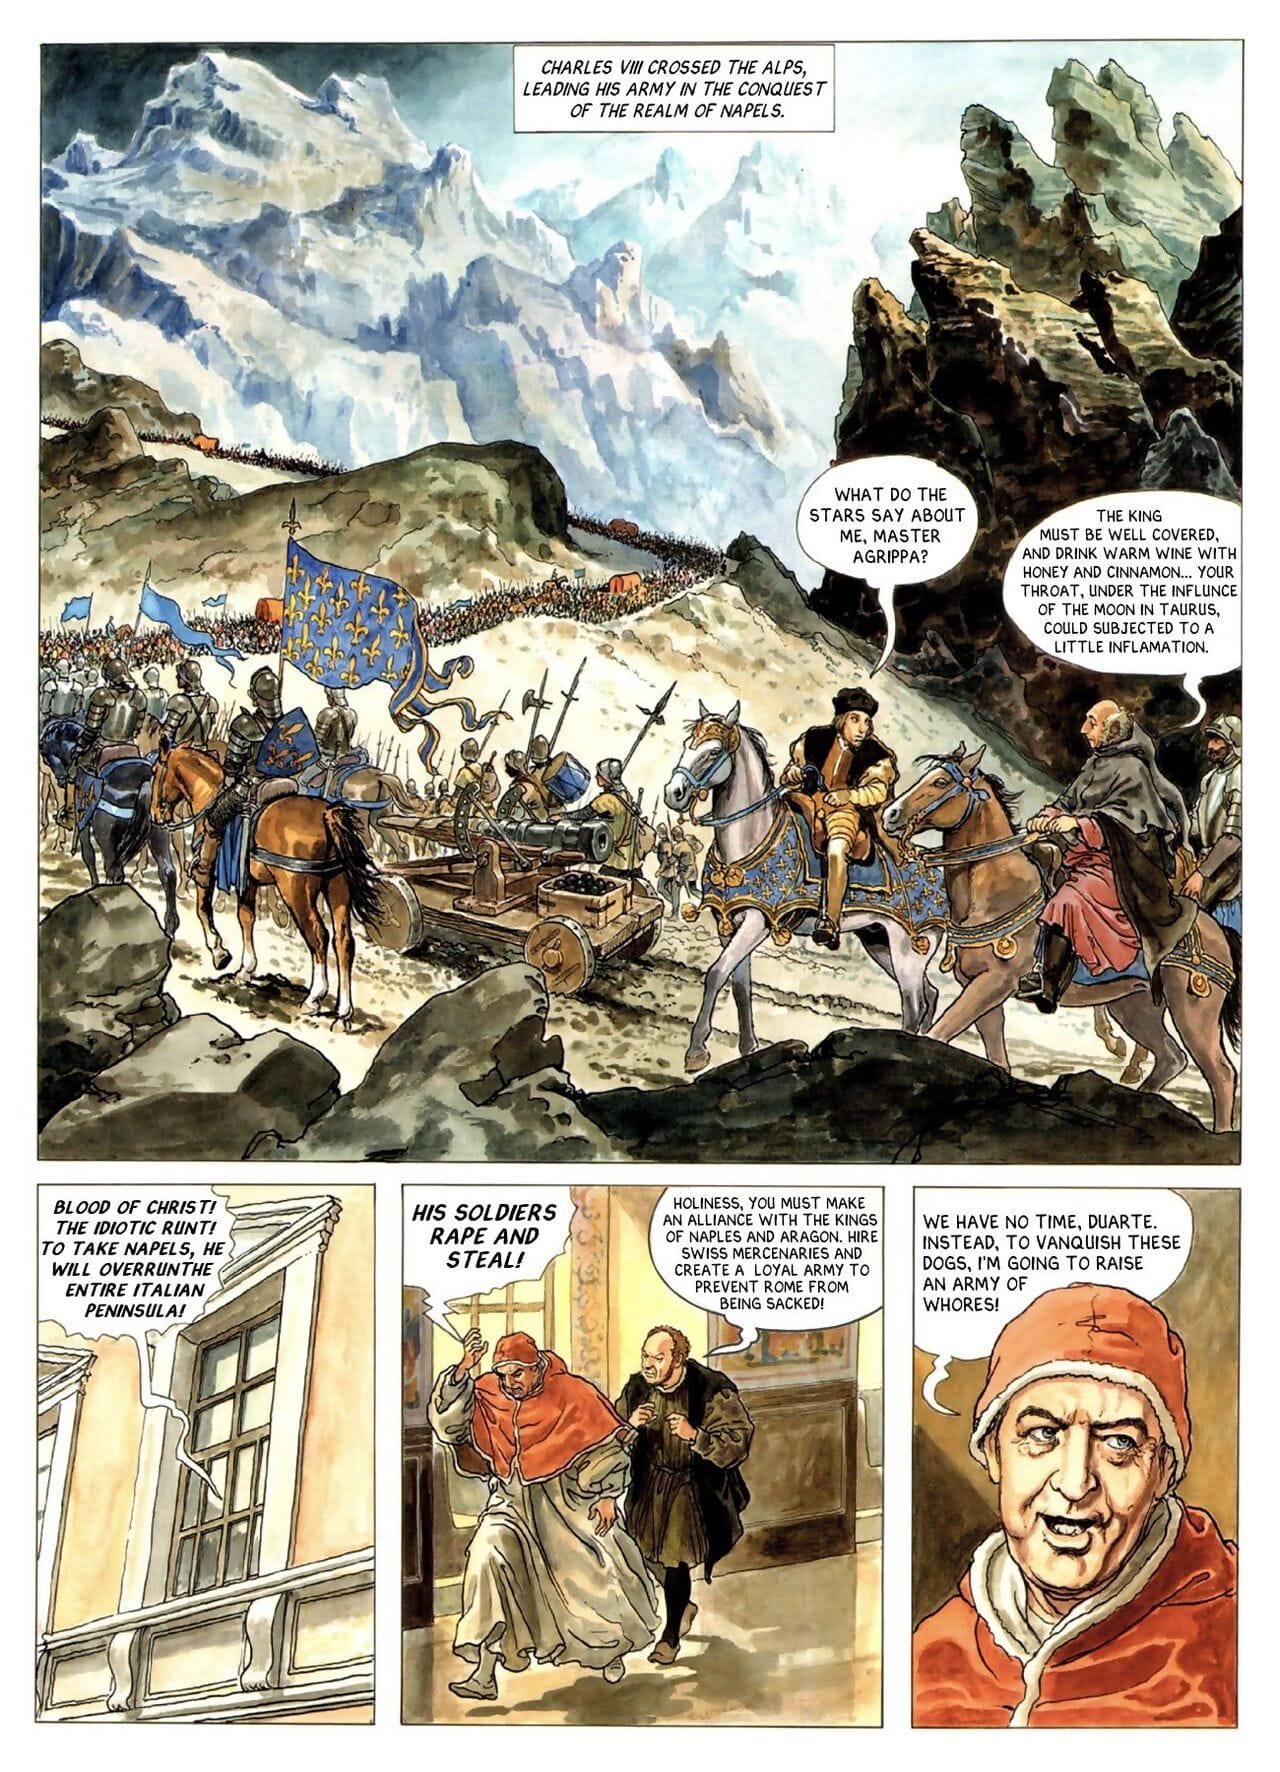 Borgia #3 - The Flames of the Pyre - part 2 page 1